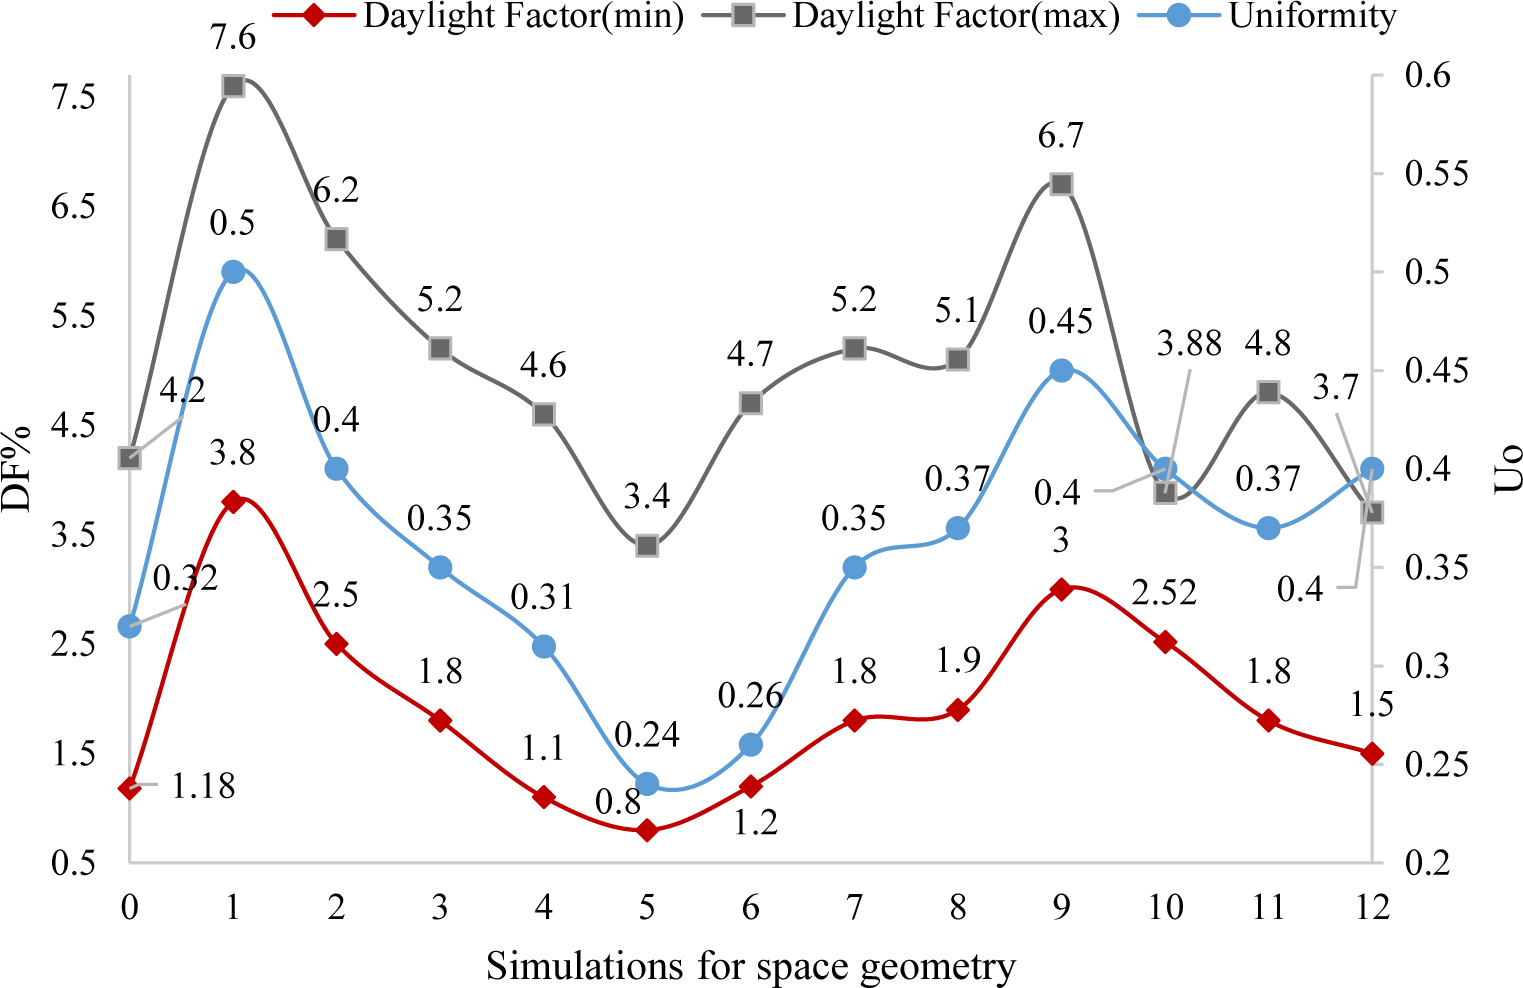 The results of modeling in the study of visual comfort of space.